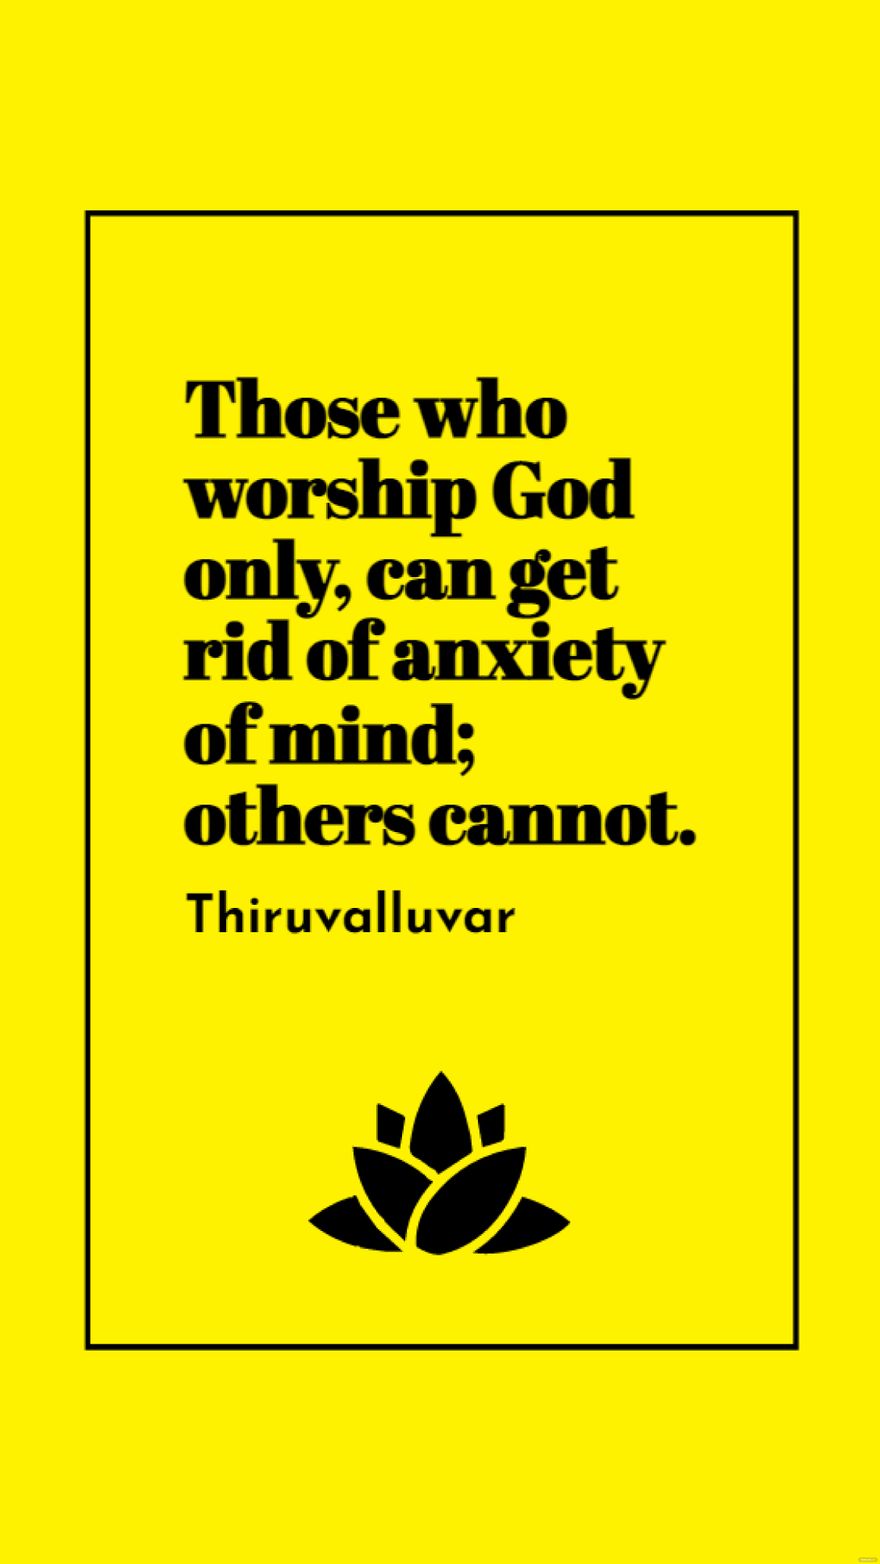 Free Thiruvalluvar - Those who worship God only, can get rid of anxiety of mind; others cannot.